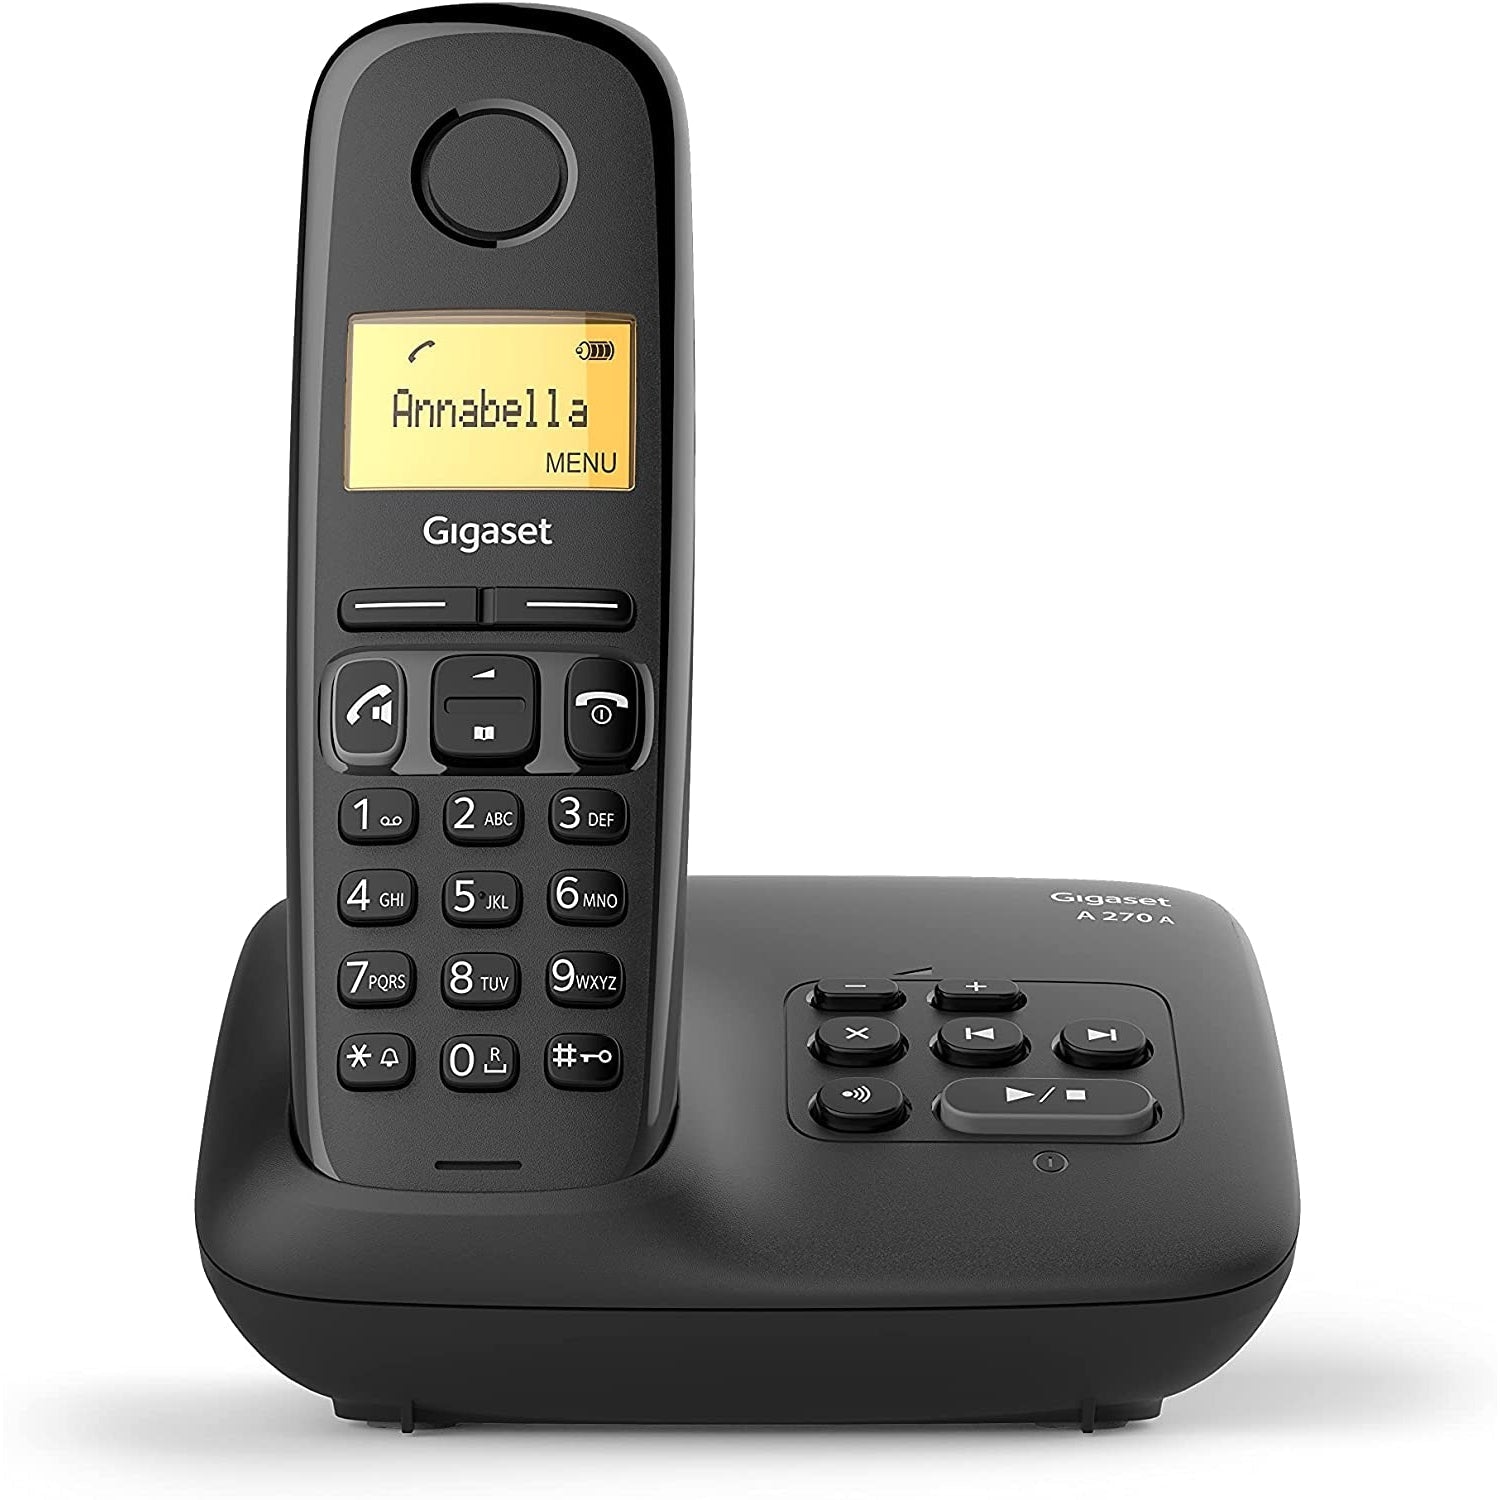 Gigaset A270A Basic Cordless Home Phone with Big Display - Single - Refurbished Excellent